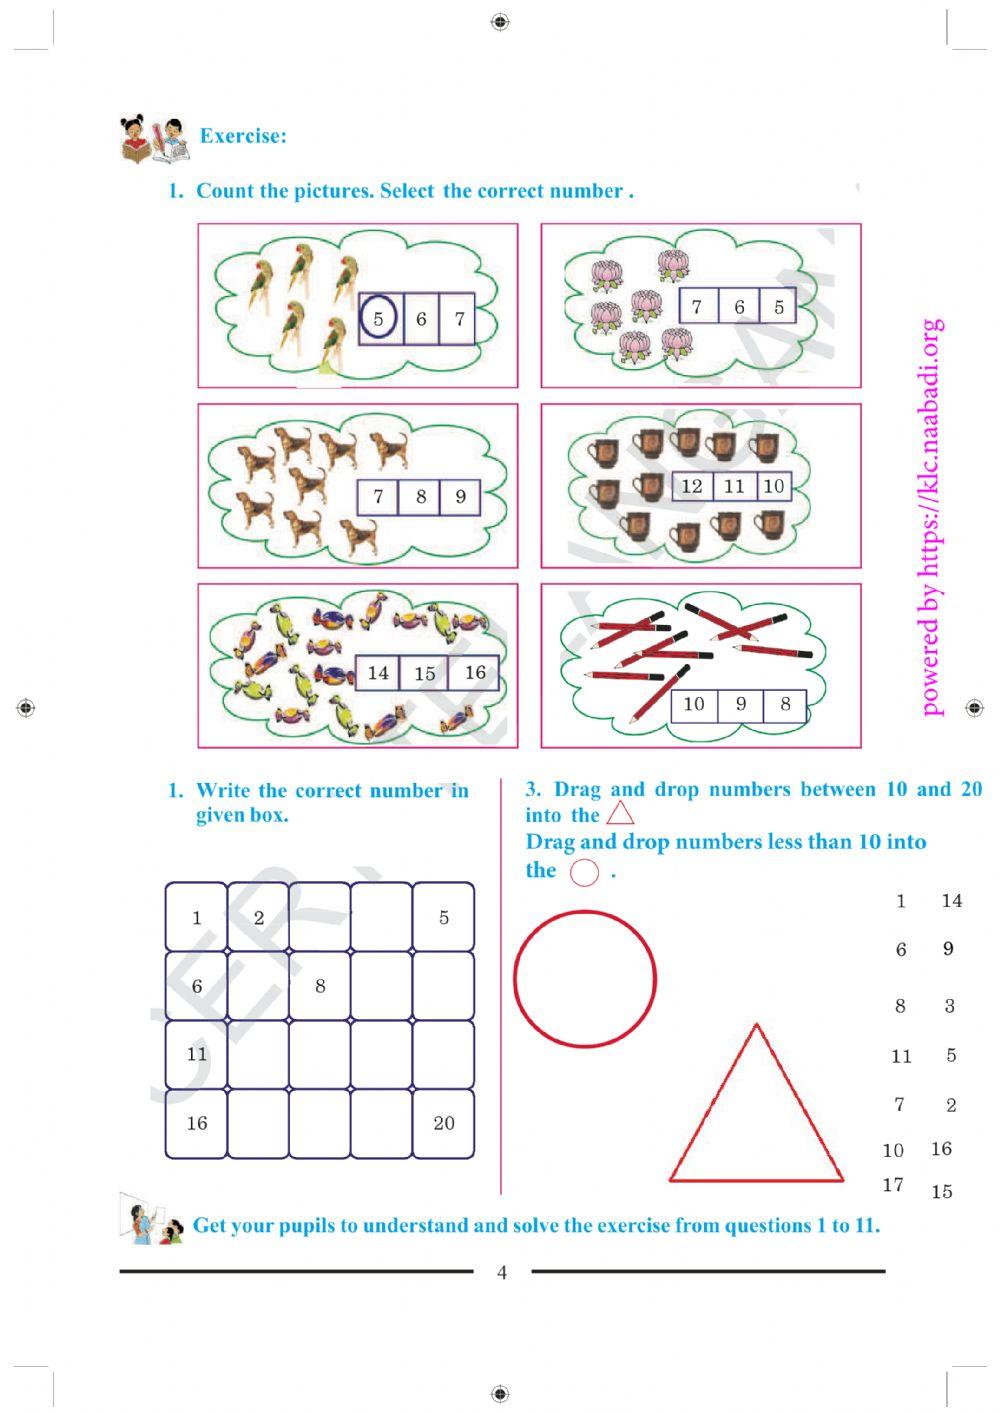 Do Exercise-PageNo16-Numbers from 1 to 20- 2nd Class Mathematics